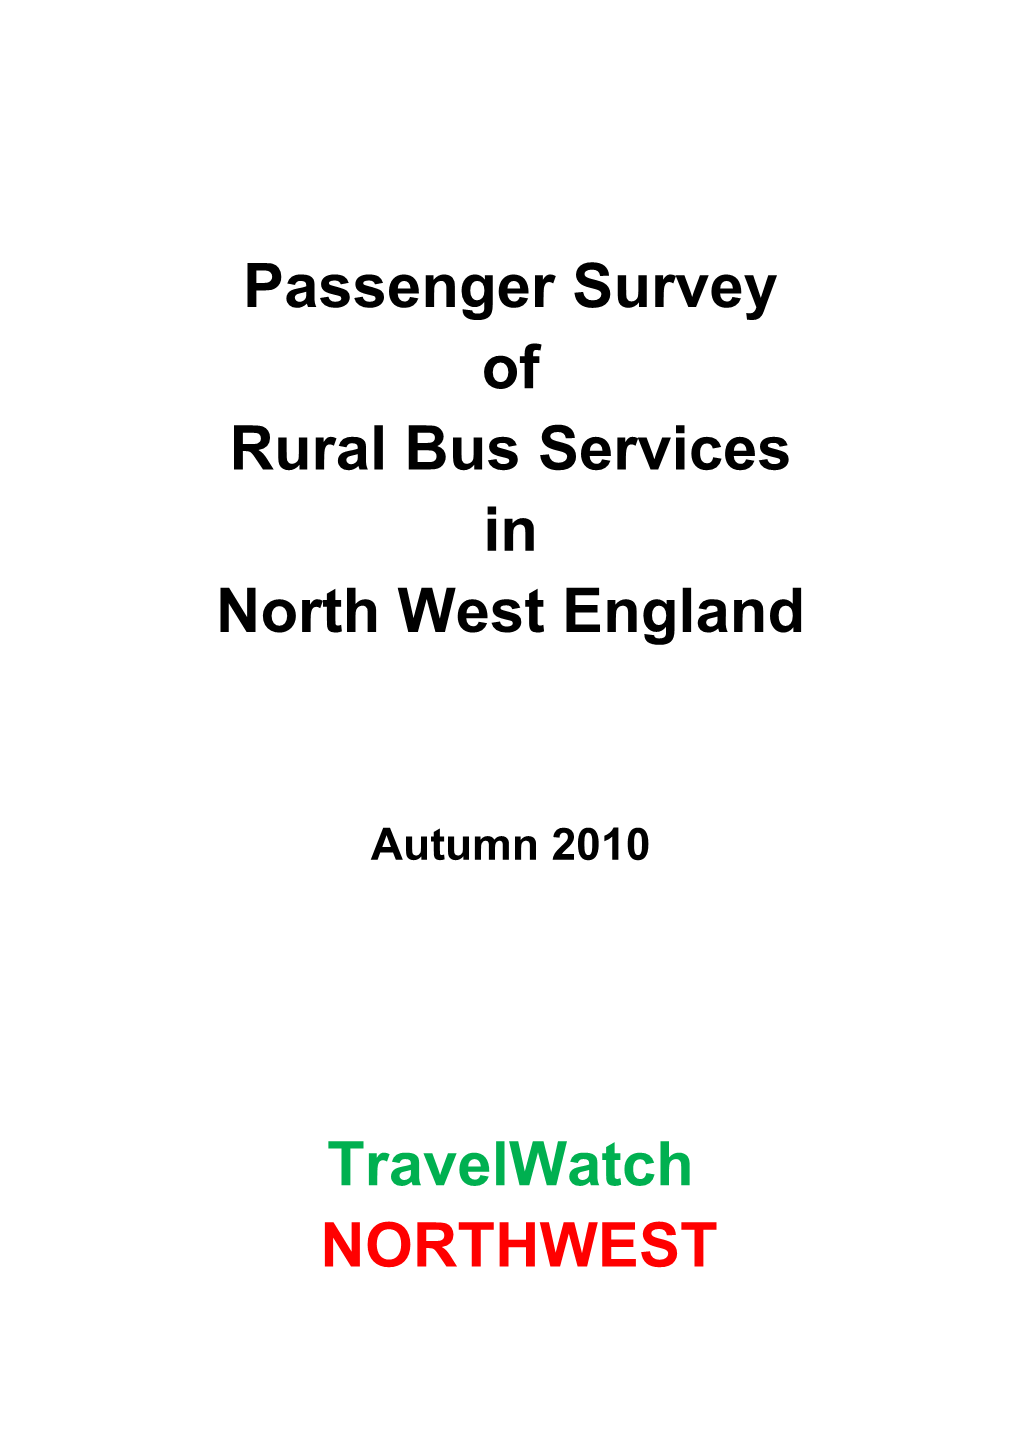 Rural Bus Services in NW England